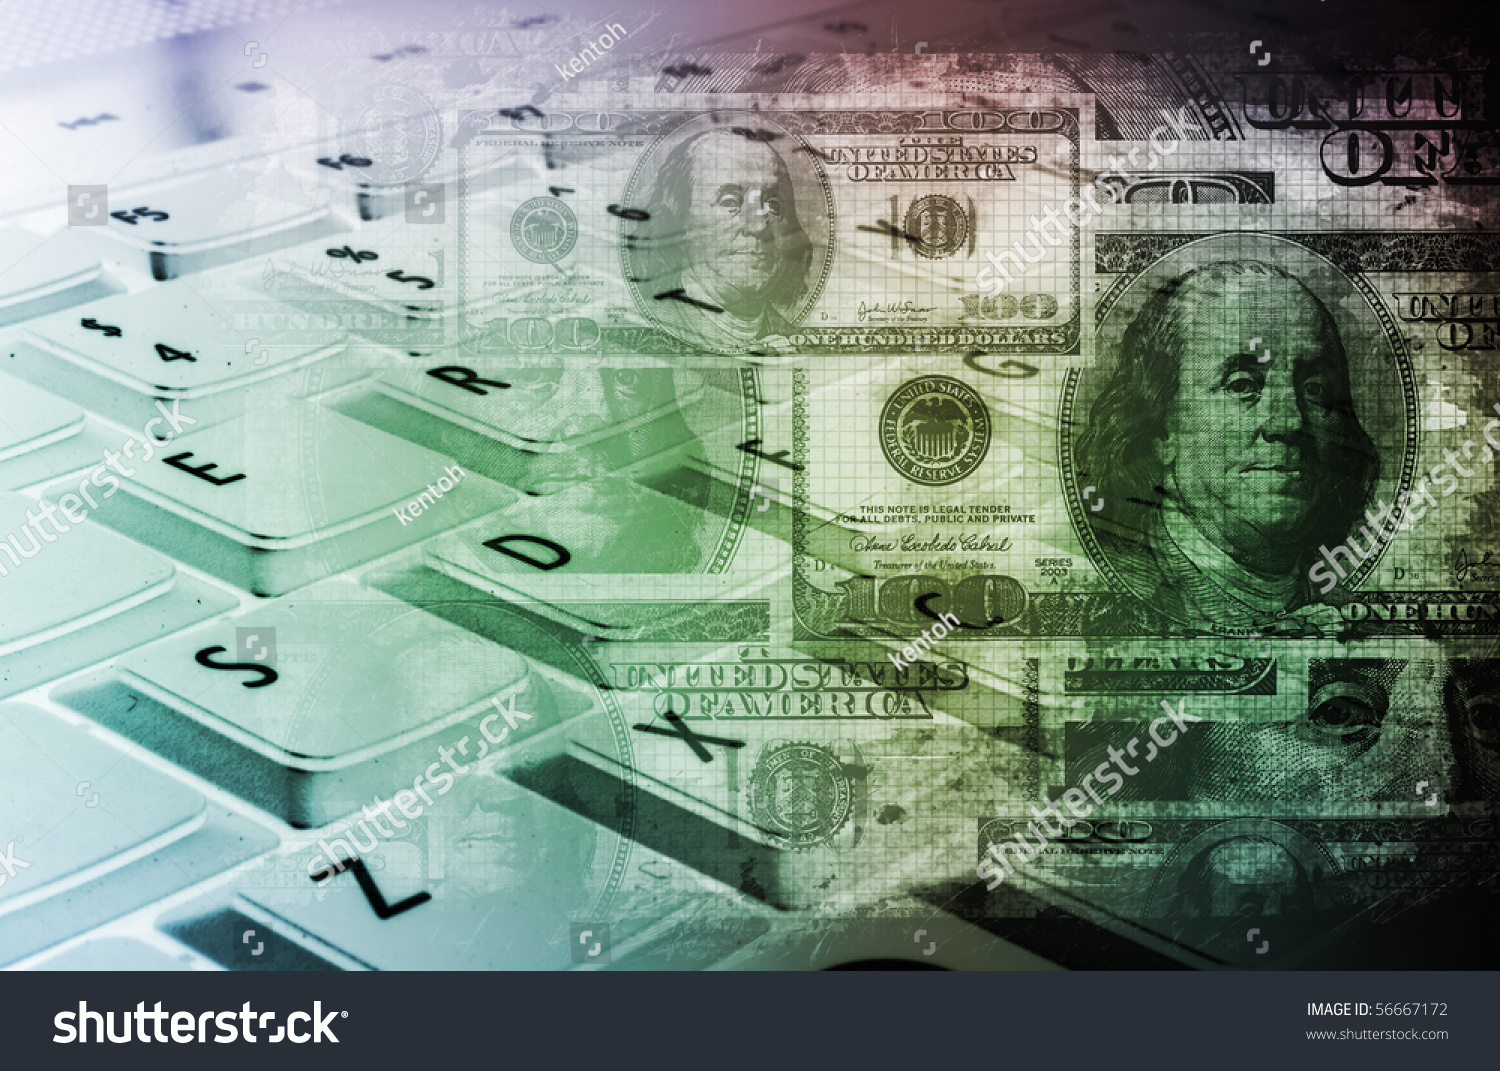 Online Shopping Concept Background As A Abstract Stock Photo 56667172